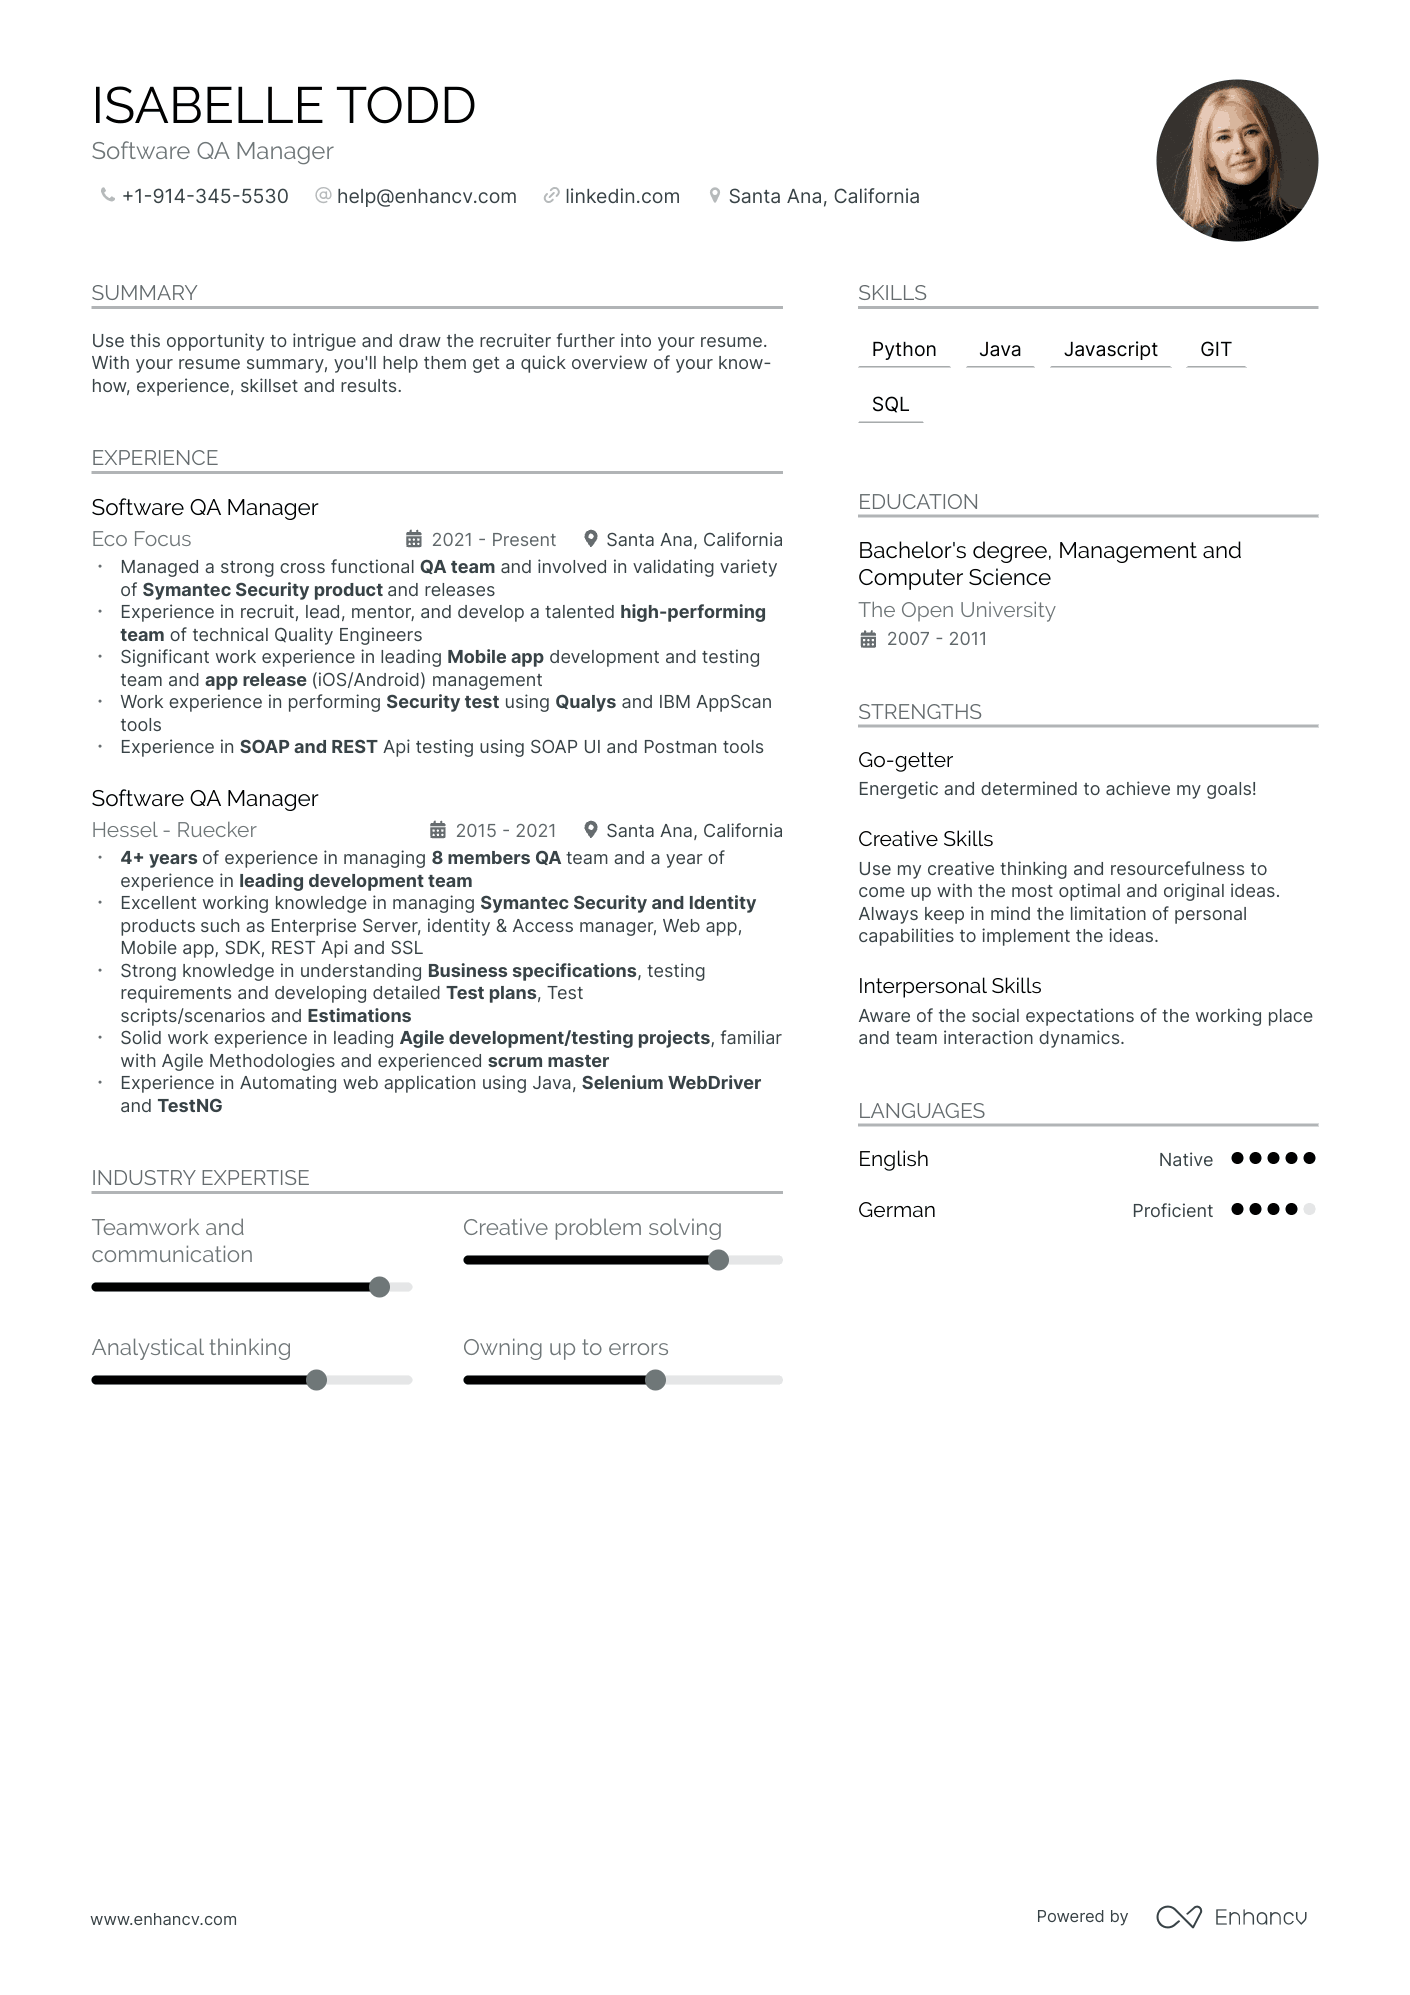 Software QA Manager resume example